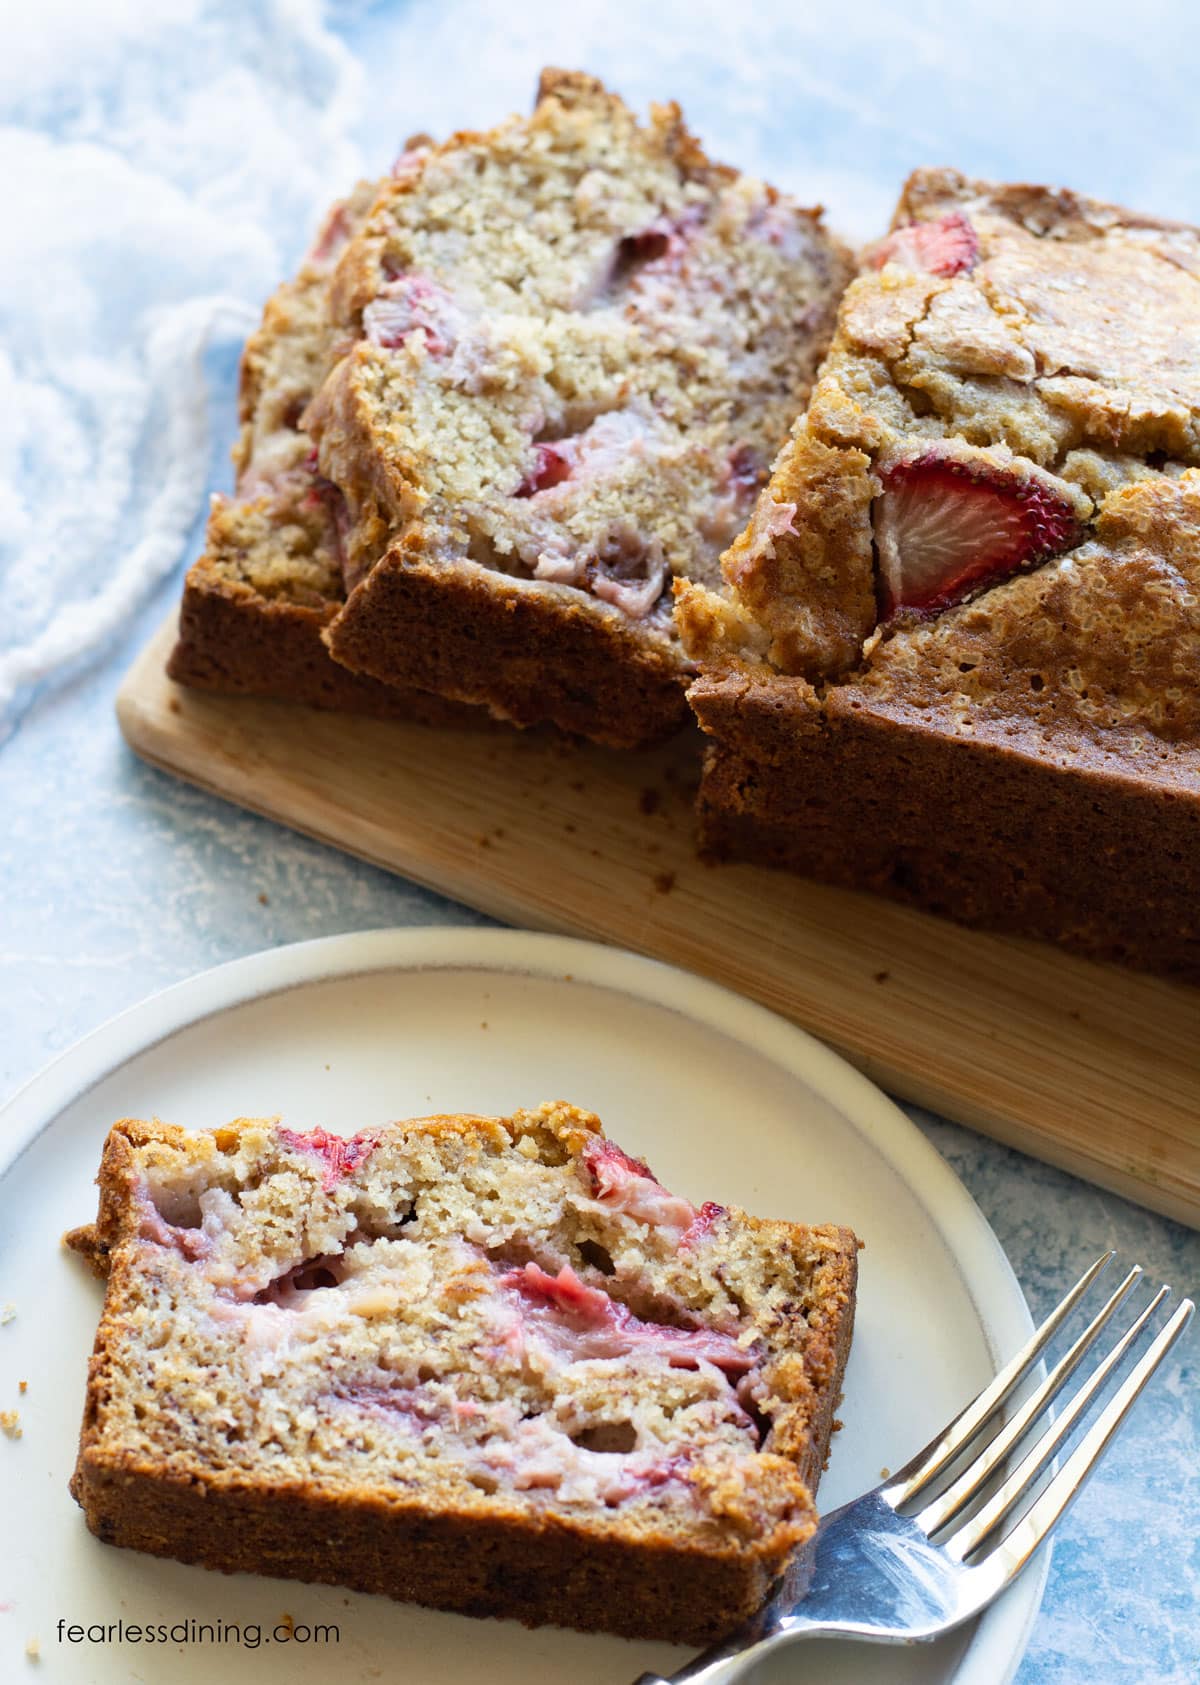 A slice of strawberry banana bread on a plate next to the sliced loaf.